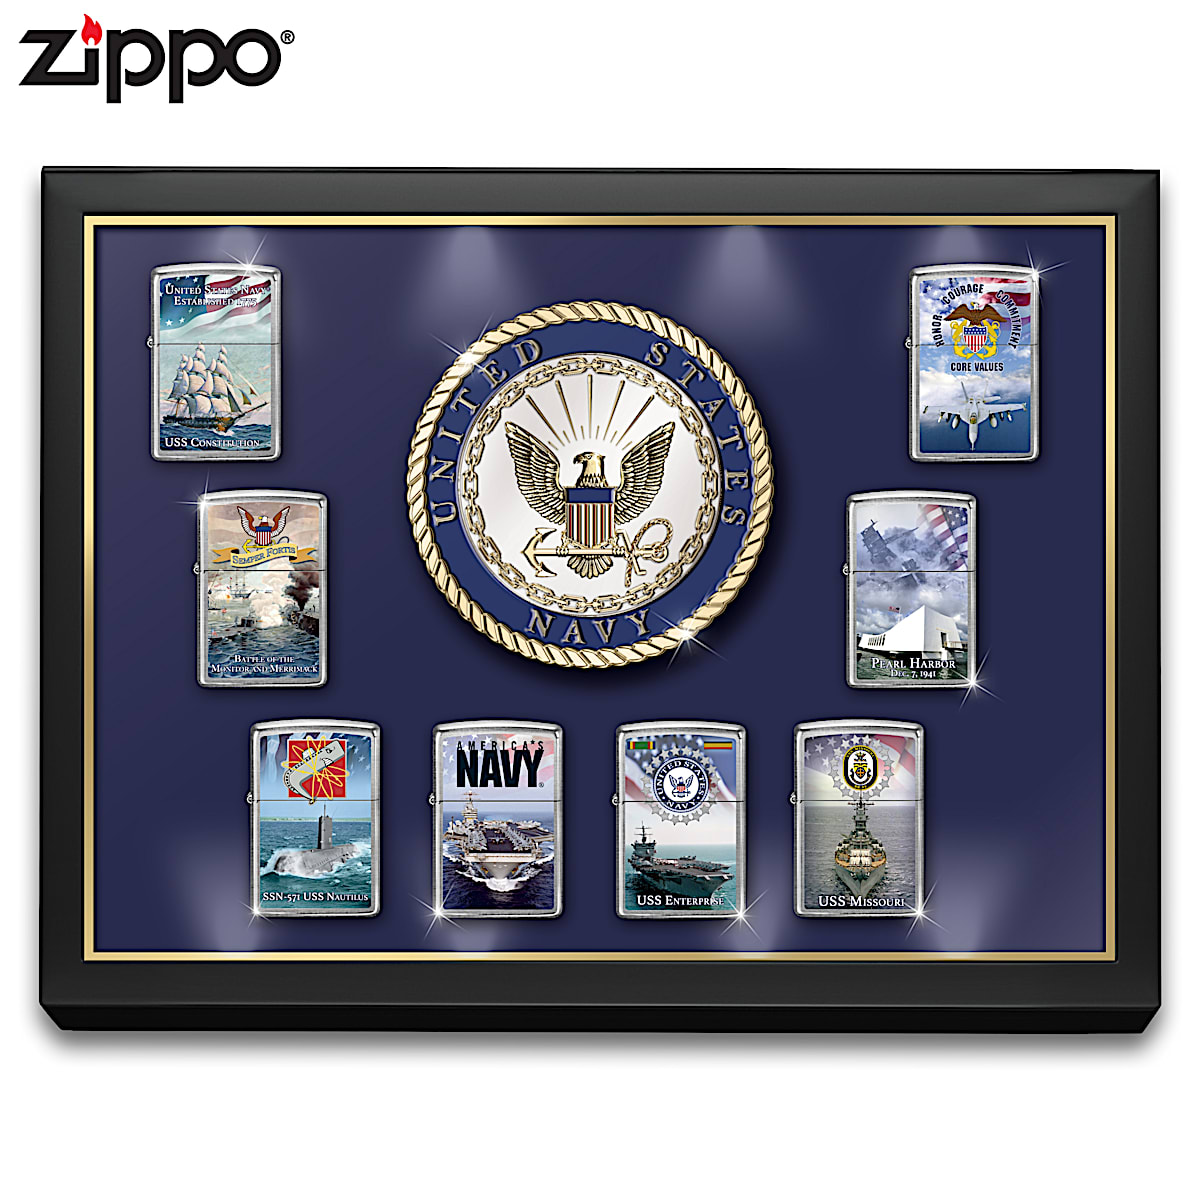 U.S. Navy® Zippo® Lighters With Lighted Display